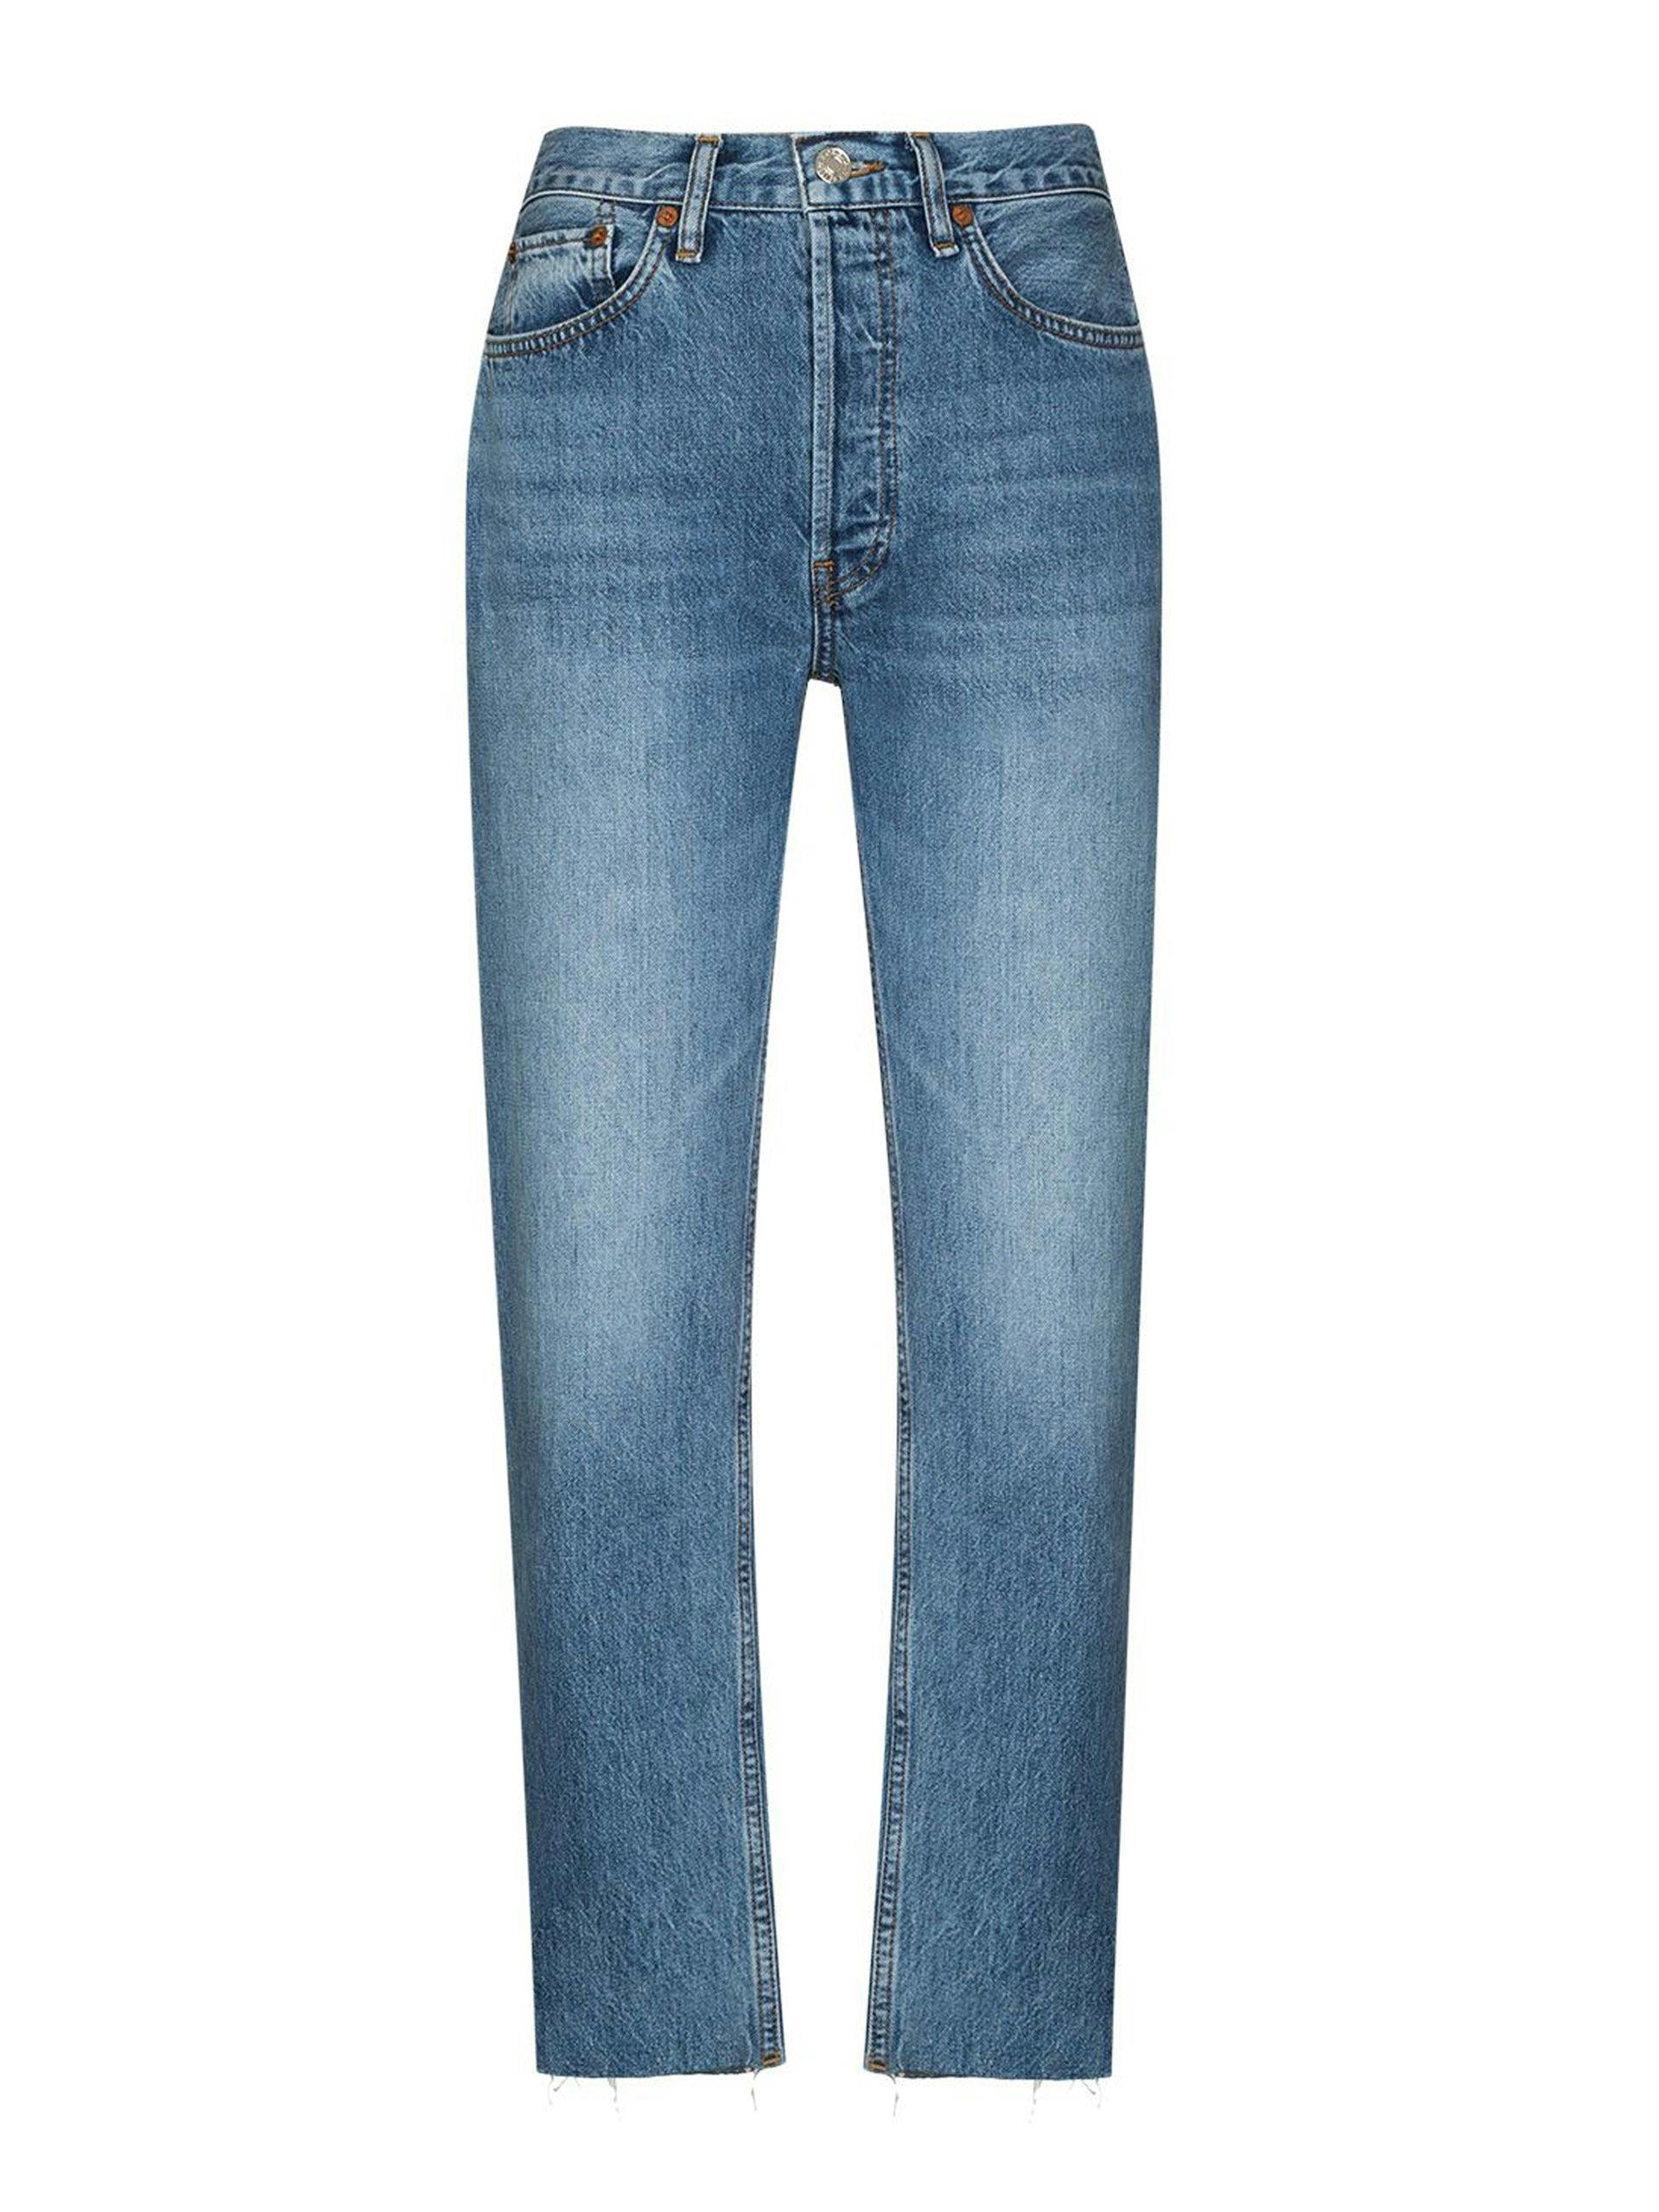 High-rise Stove Pipe jeans